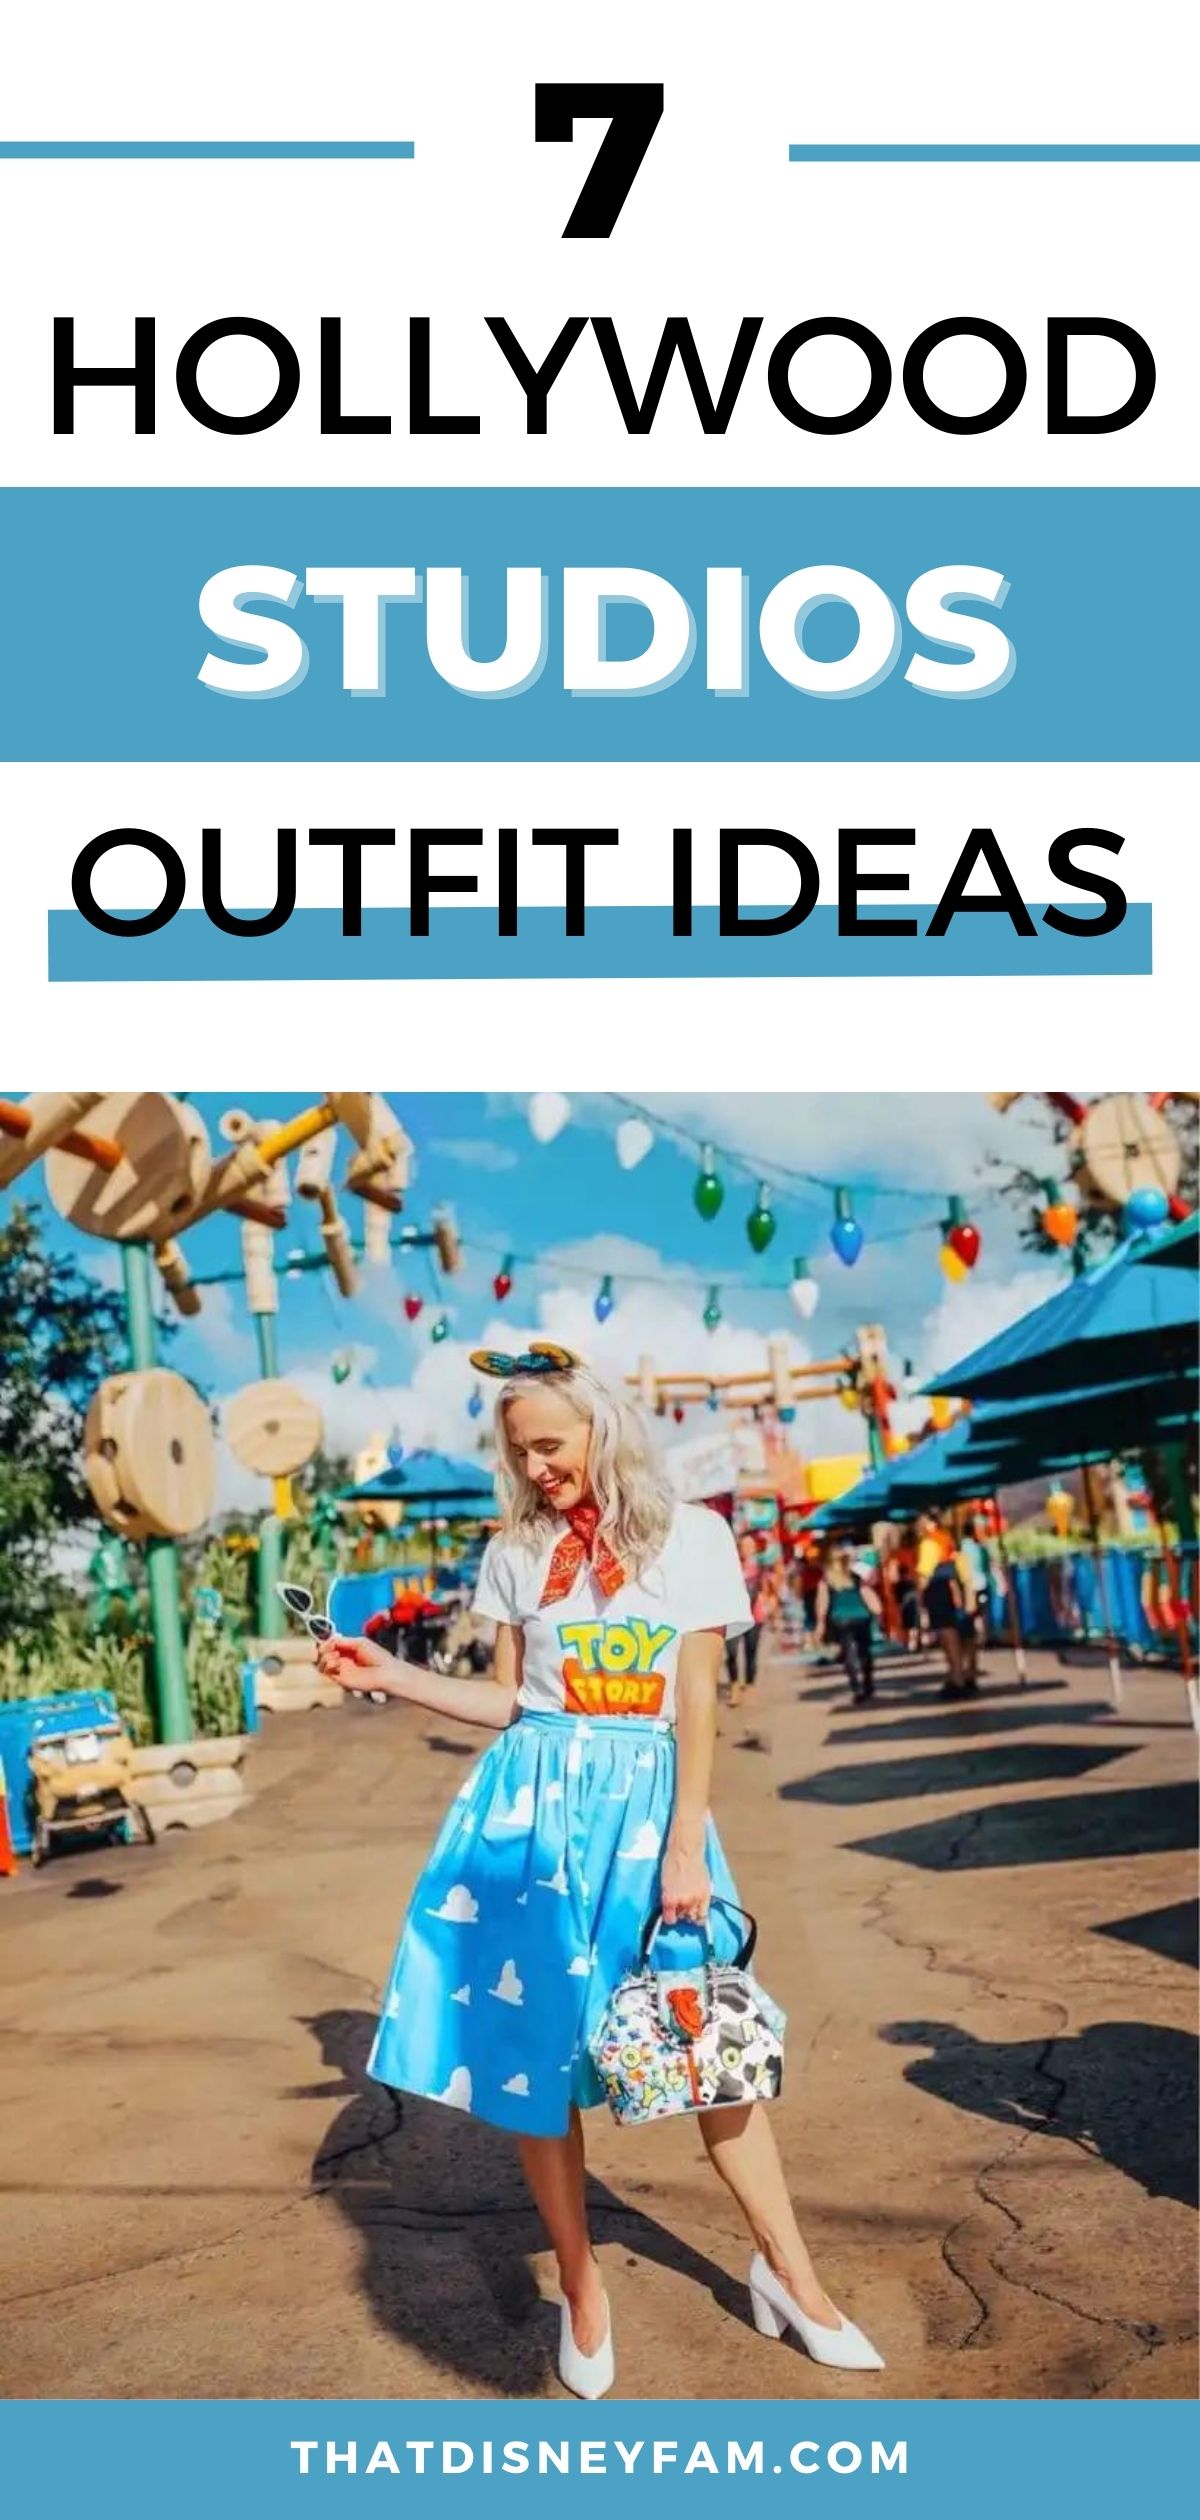 hollywood studios outfit ideas